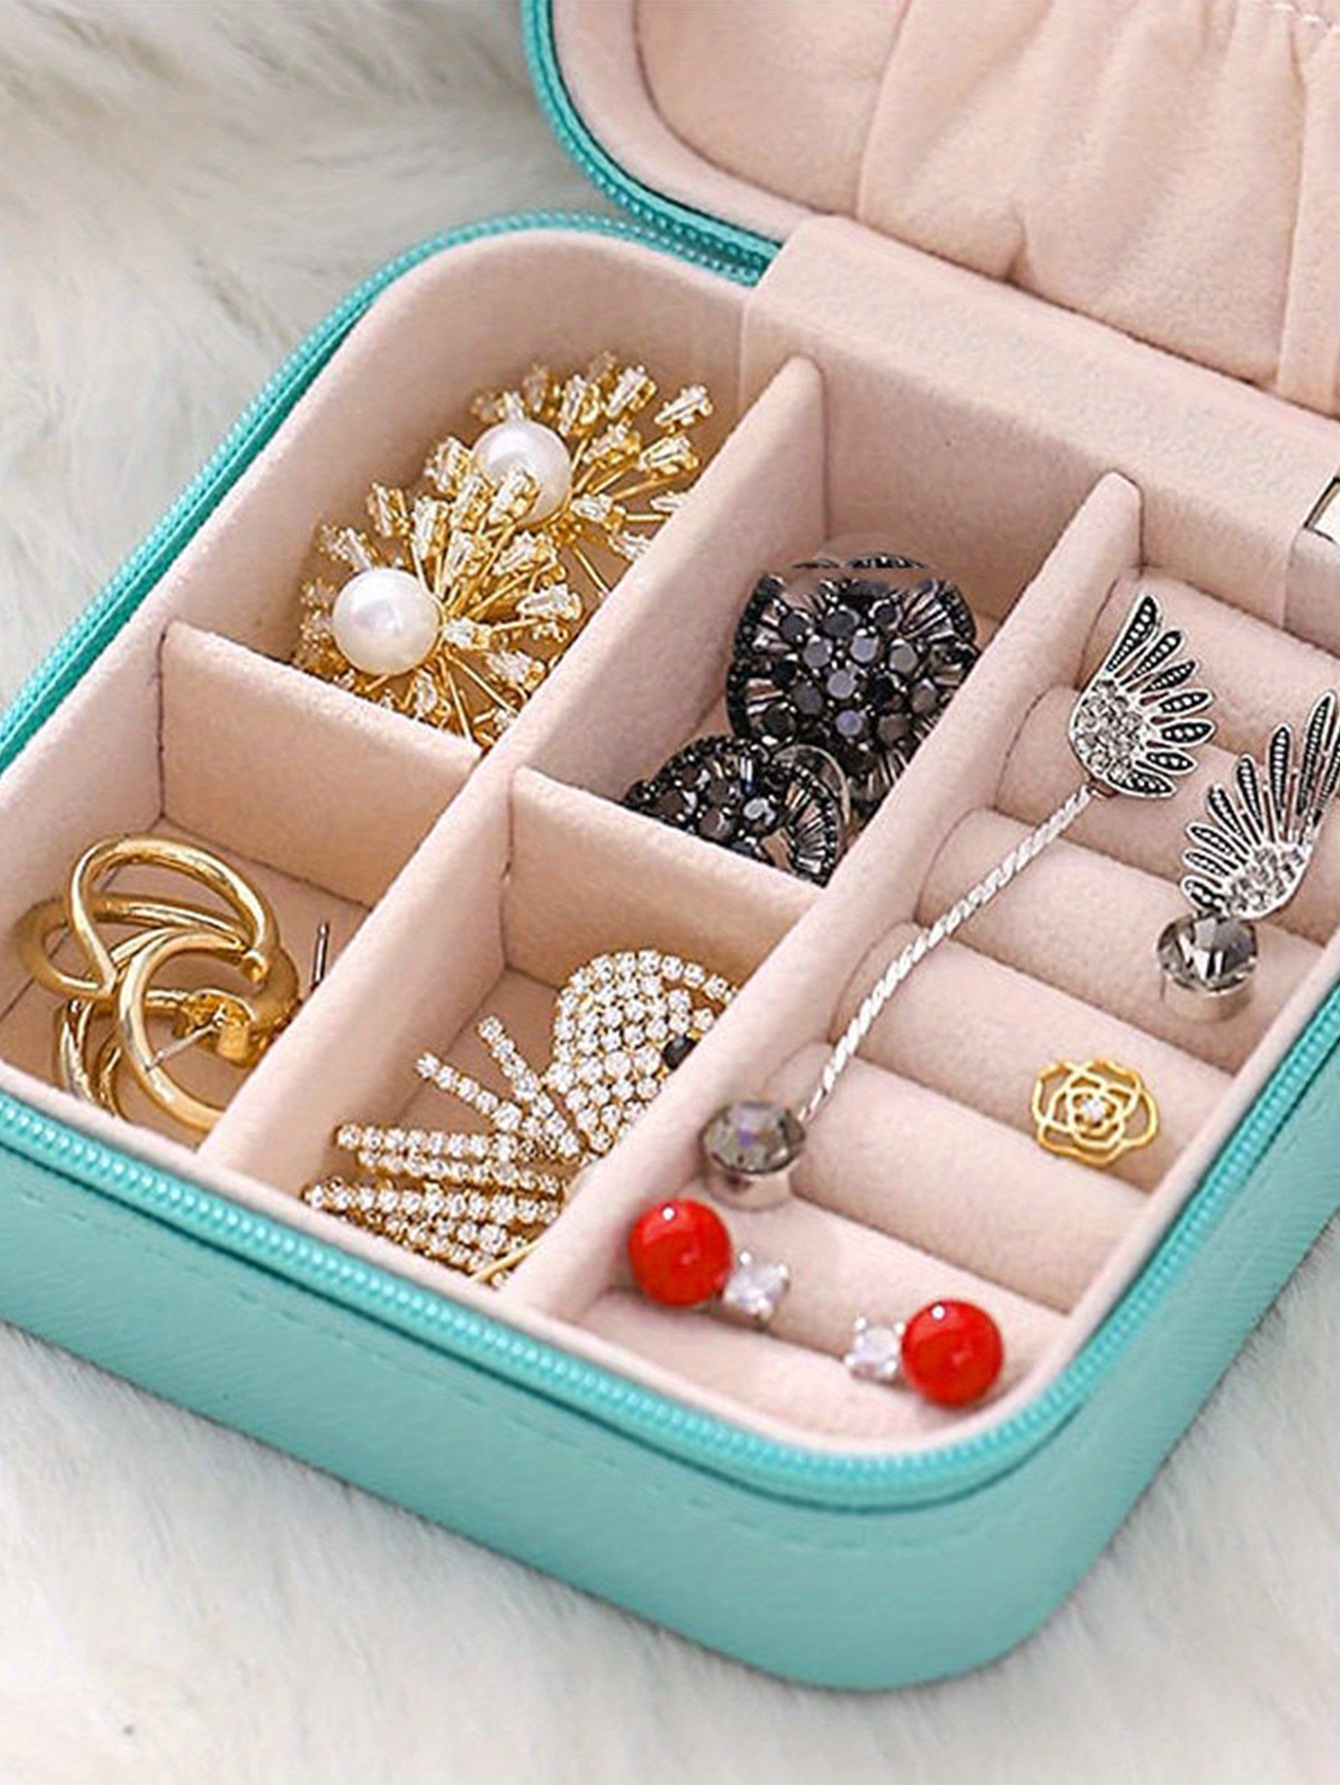 TSV Small Jewelry Box, Portable Travel Jewelry Organizer, Mini Display Case  with PU Leather for Girls Women Rings Earrings Necklaces Storage